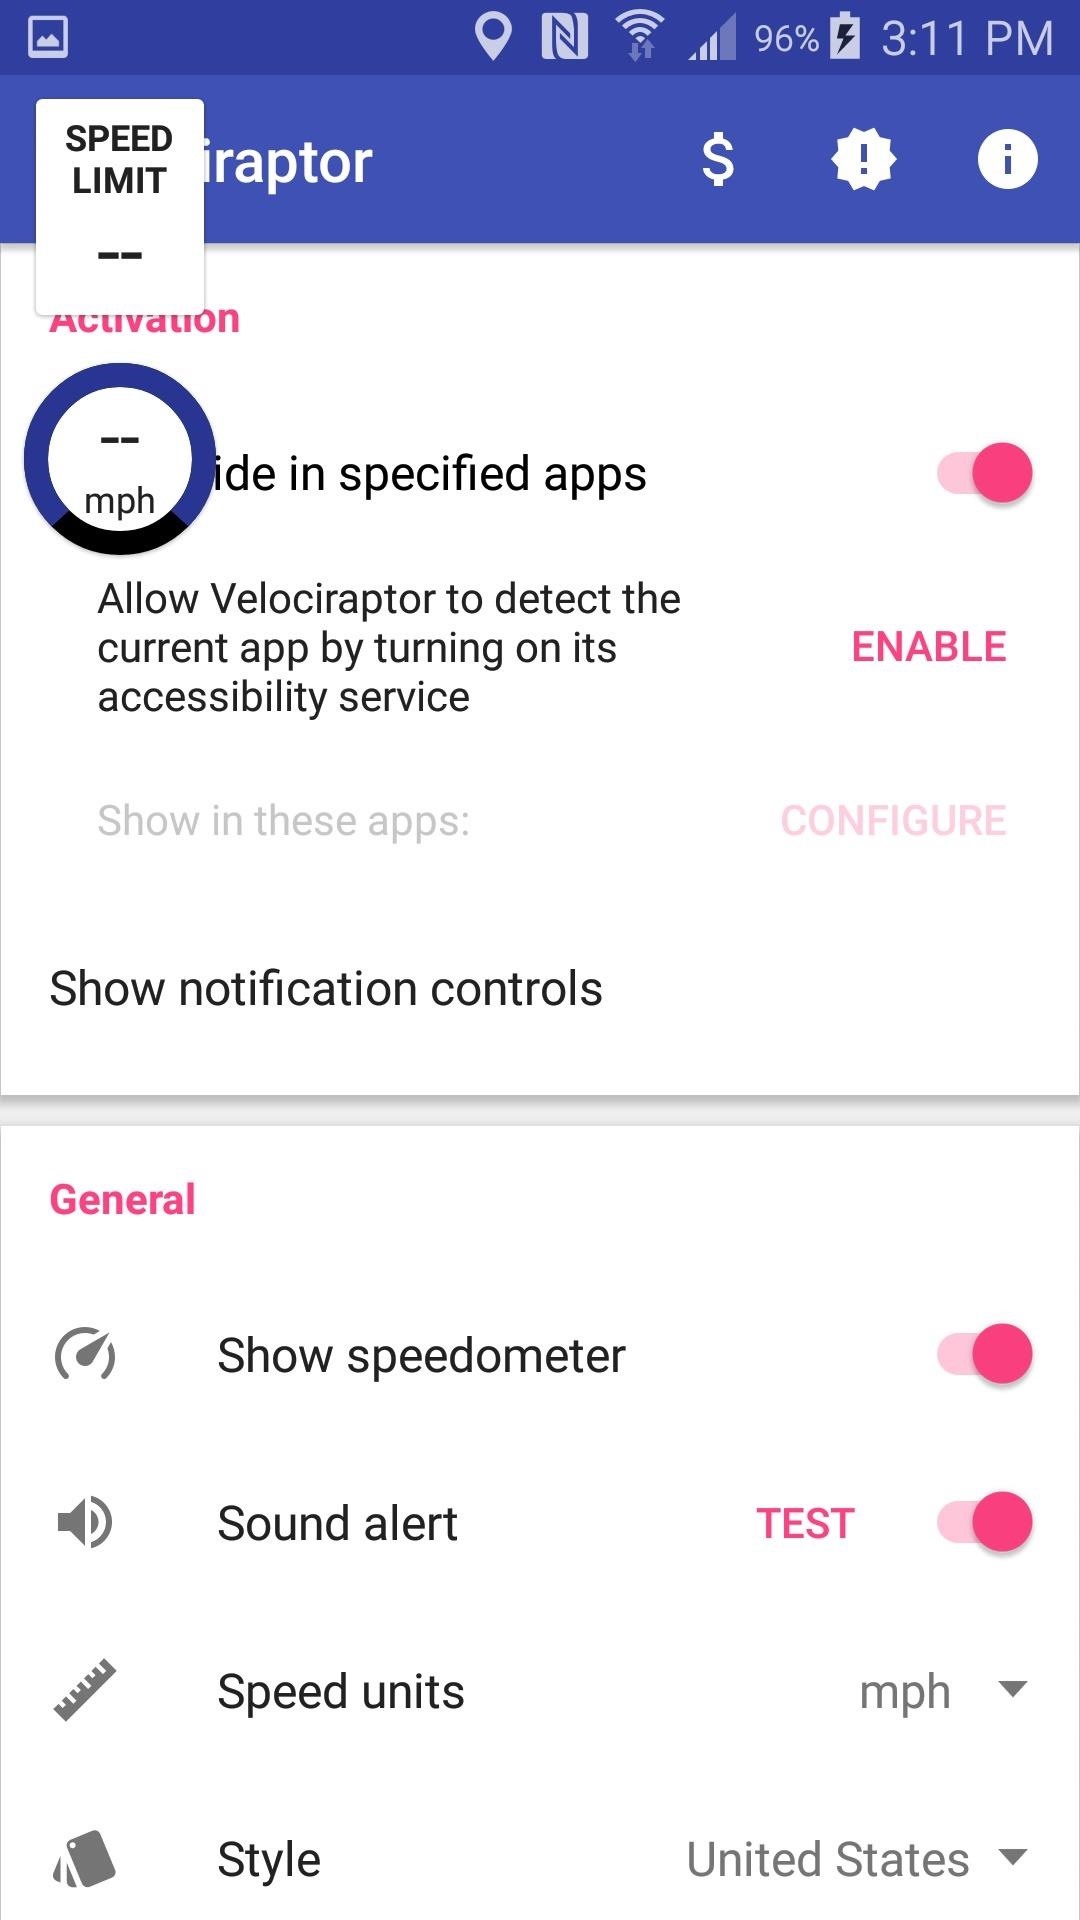 How to Add a Speedometer to Google Maps on Android